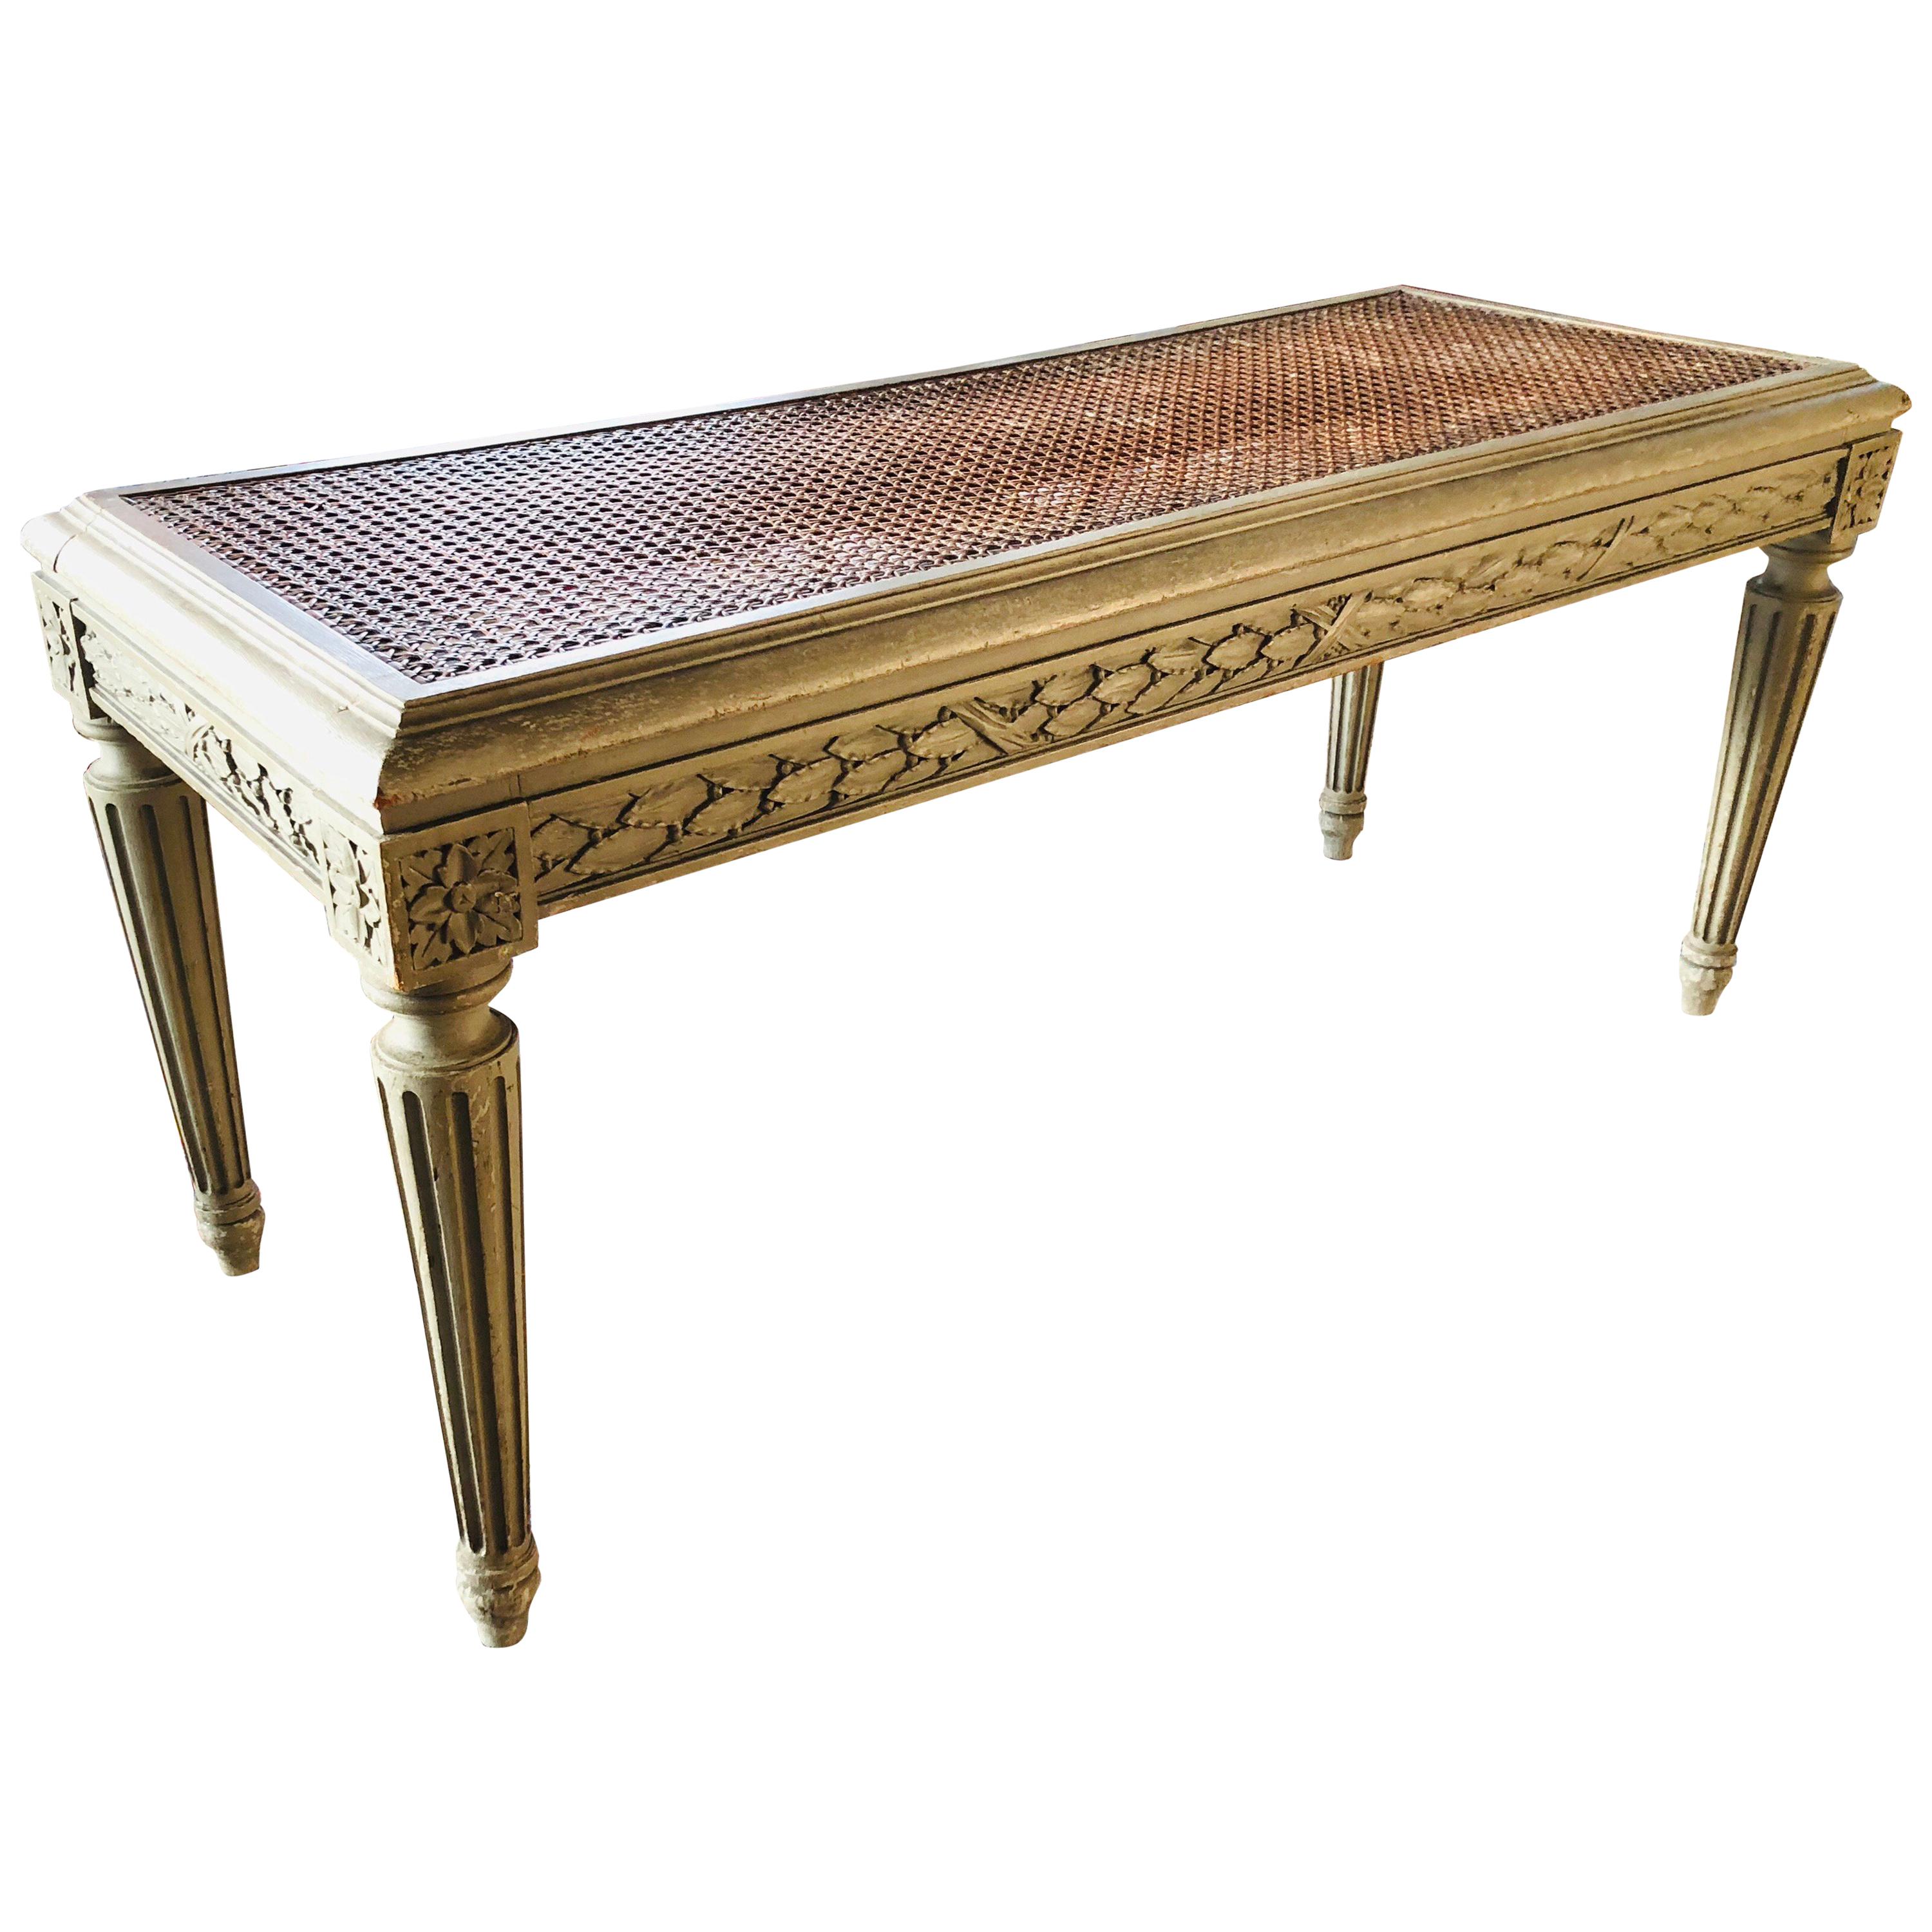 19th Century French Antique Hand Carved and Painted Cane Bench, Louis XVI Style